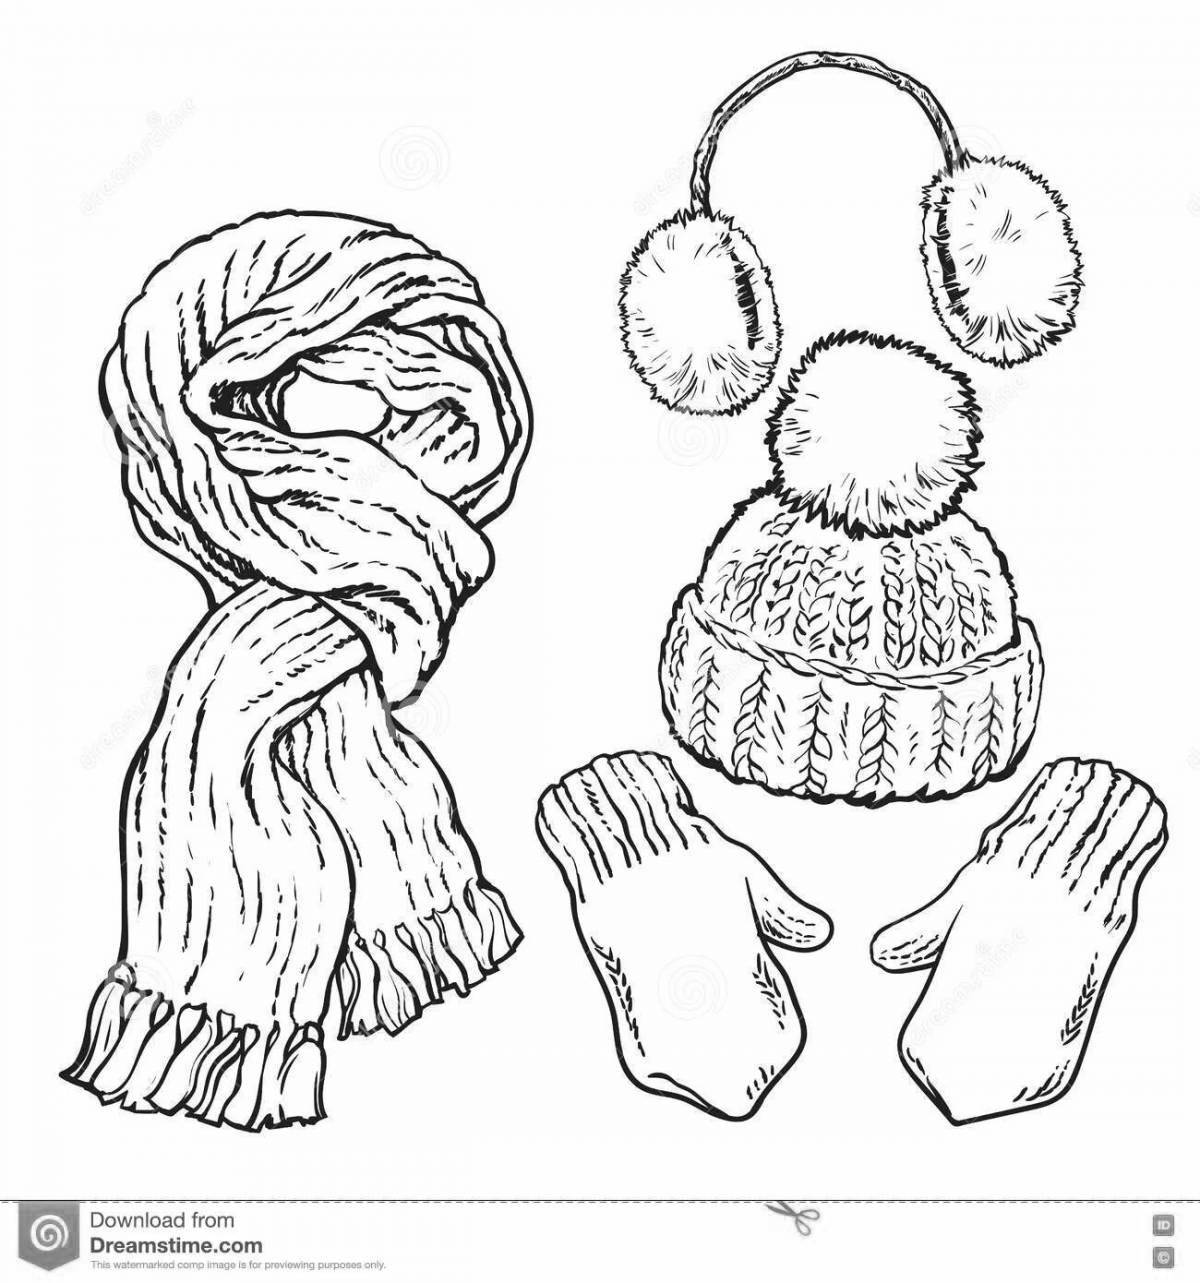 Adorable scarf and hat coloring page